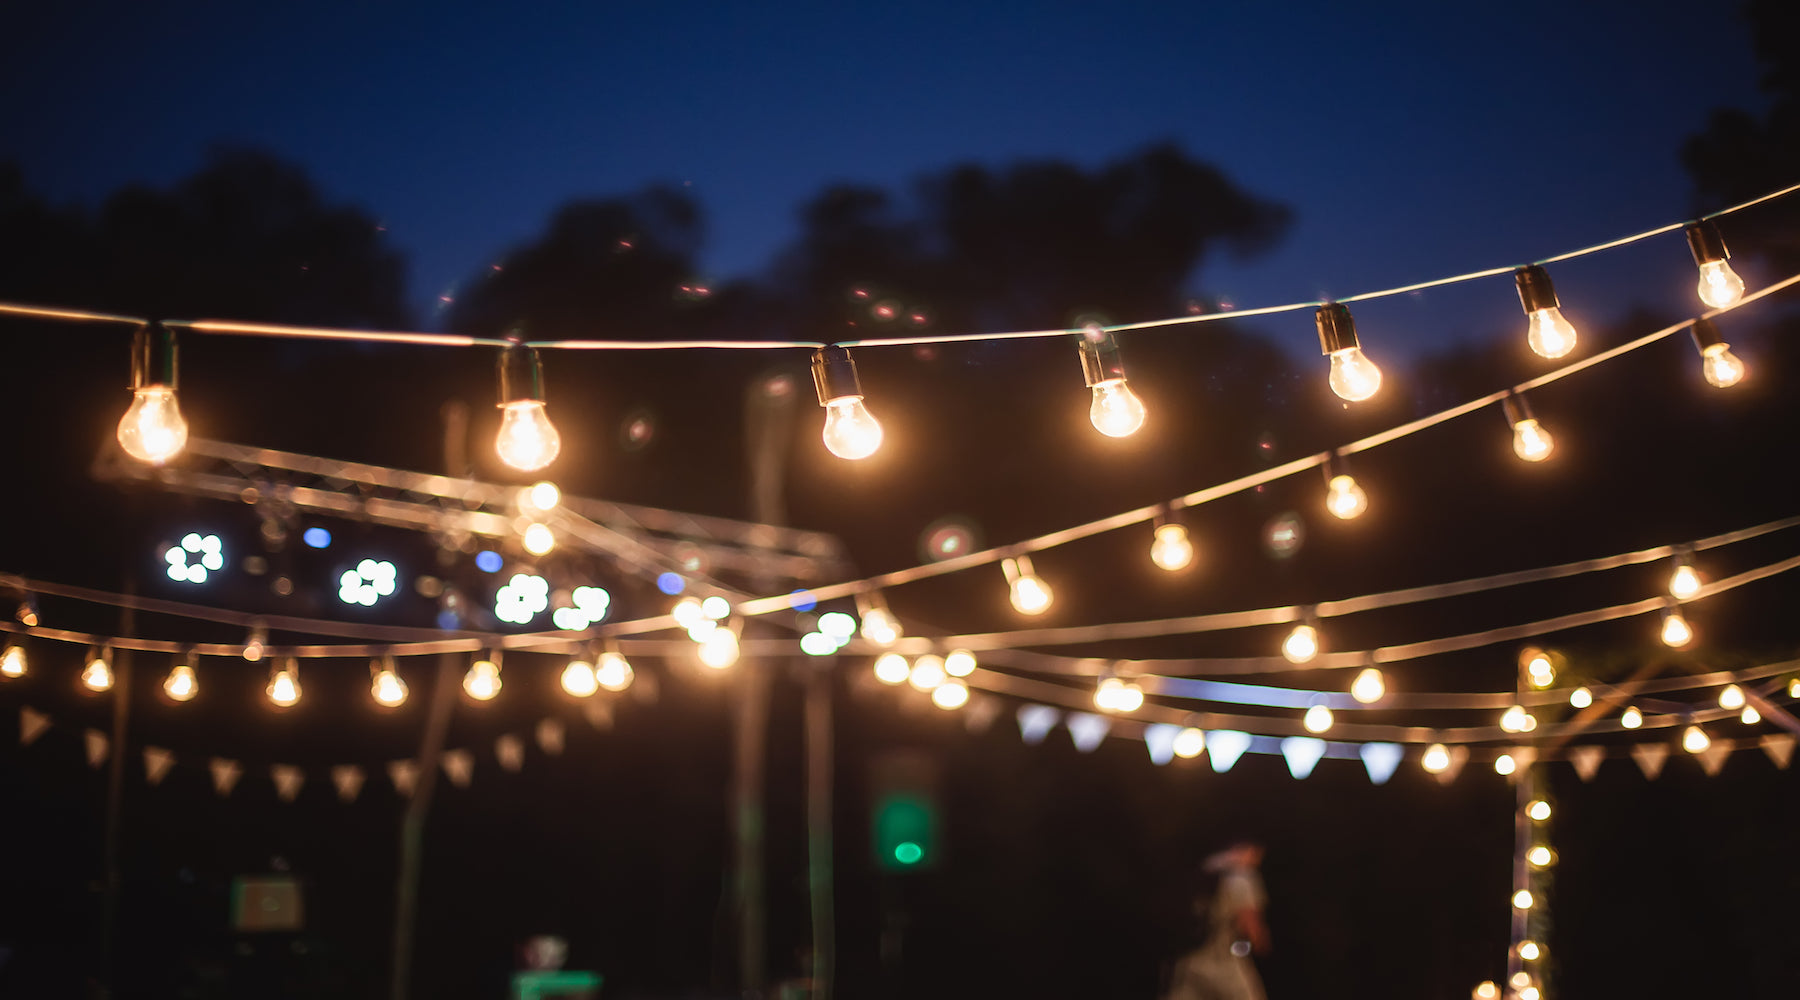 A15 LED bulbs installed in outdoor string lights